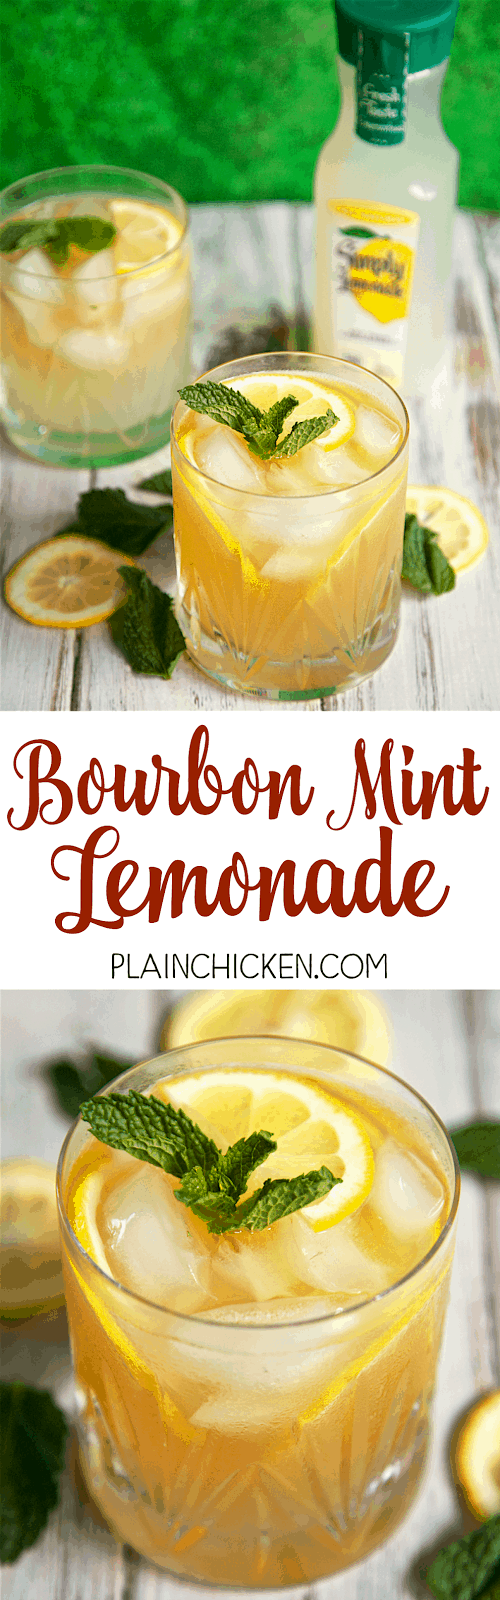 Bourbon Mint Lemonade - our Signature Summer Cocktail! Only 3 ingredients - bourbon, mint and Simply Lemonade. So light and refreshing! Mix up a pitcher for your next summer BBQ!